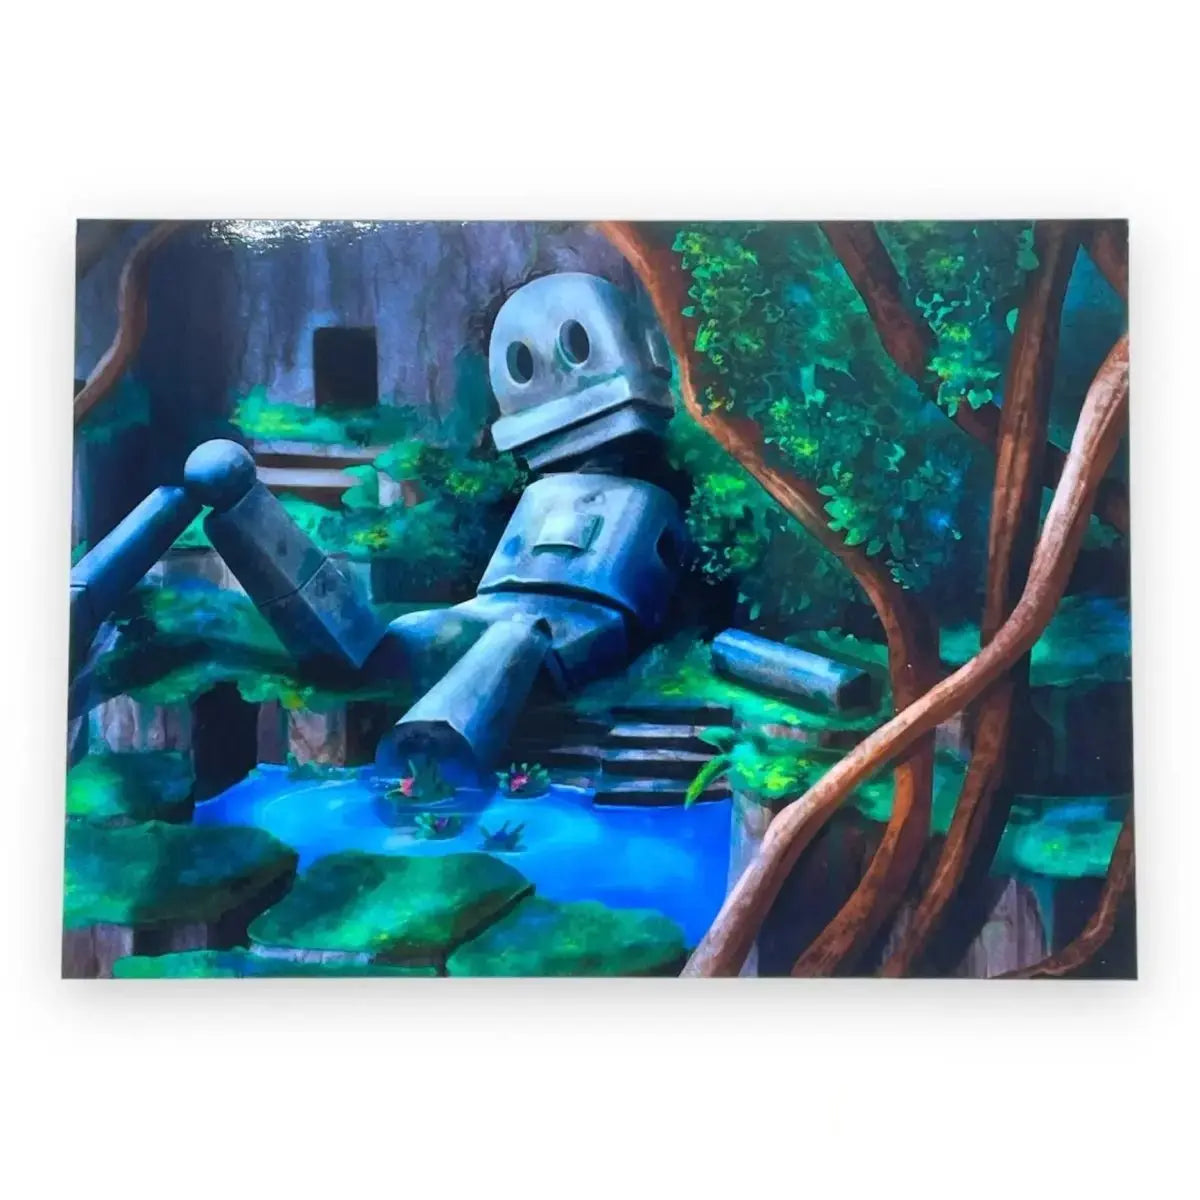 Robot in the Lake - Wall Art Poster Print Sttelland Boutique